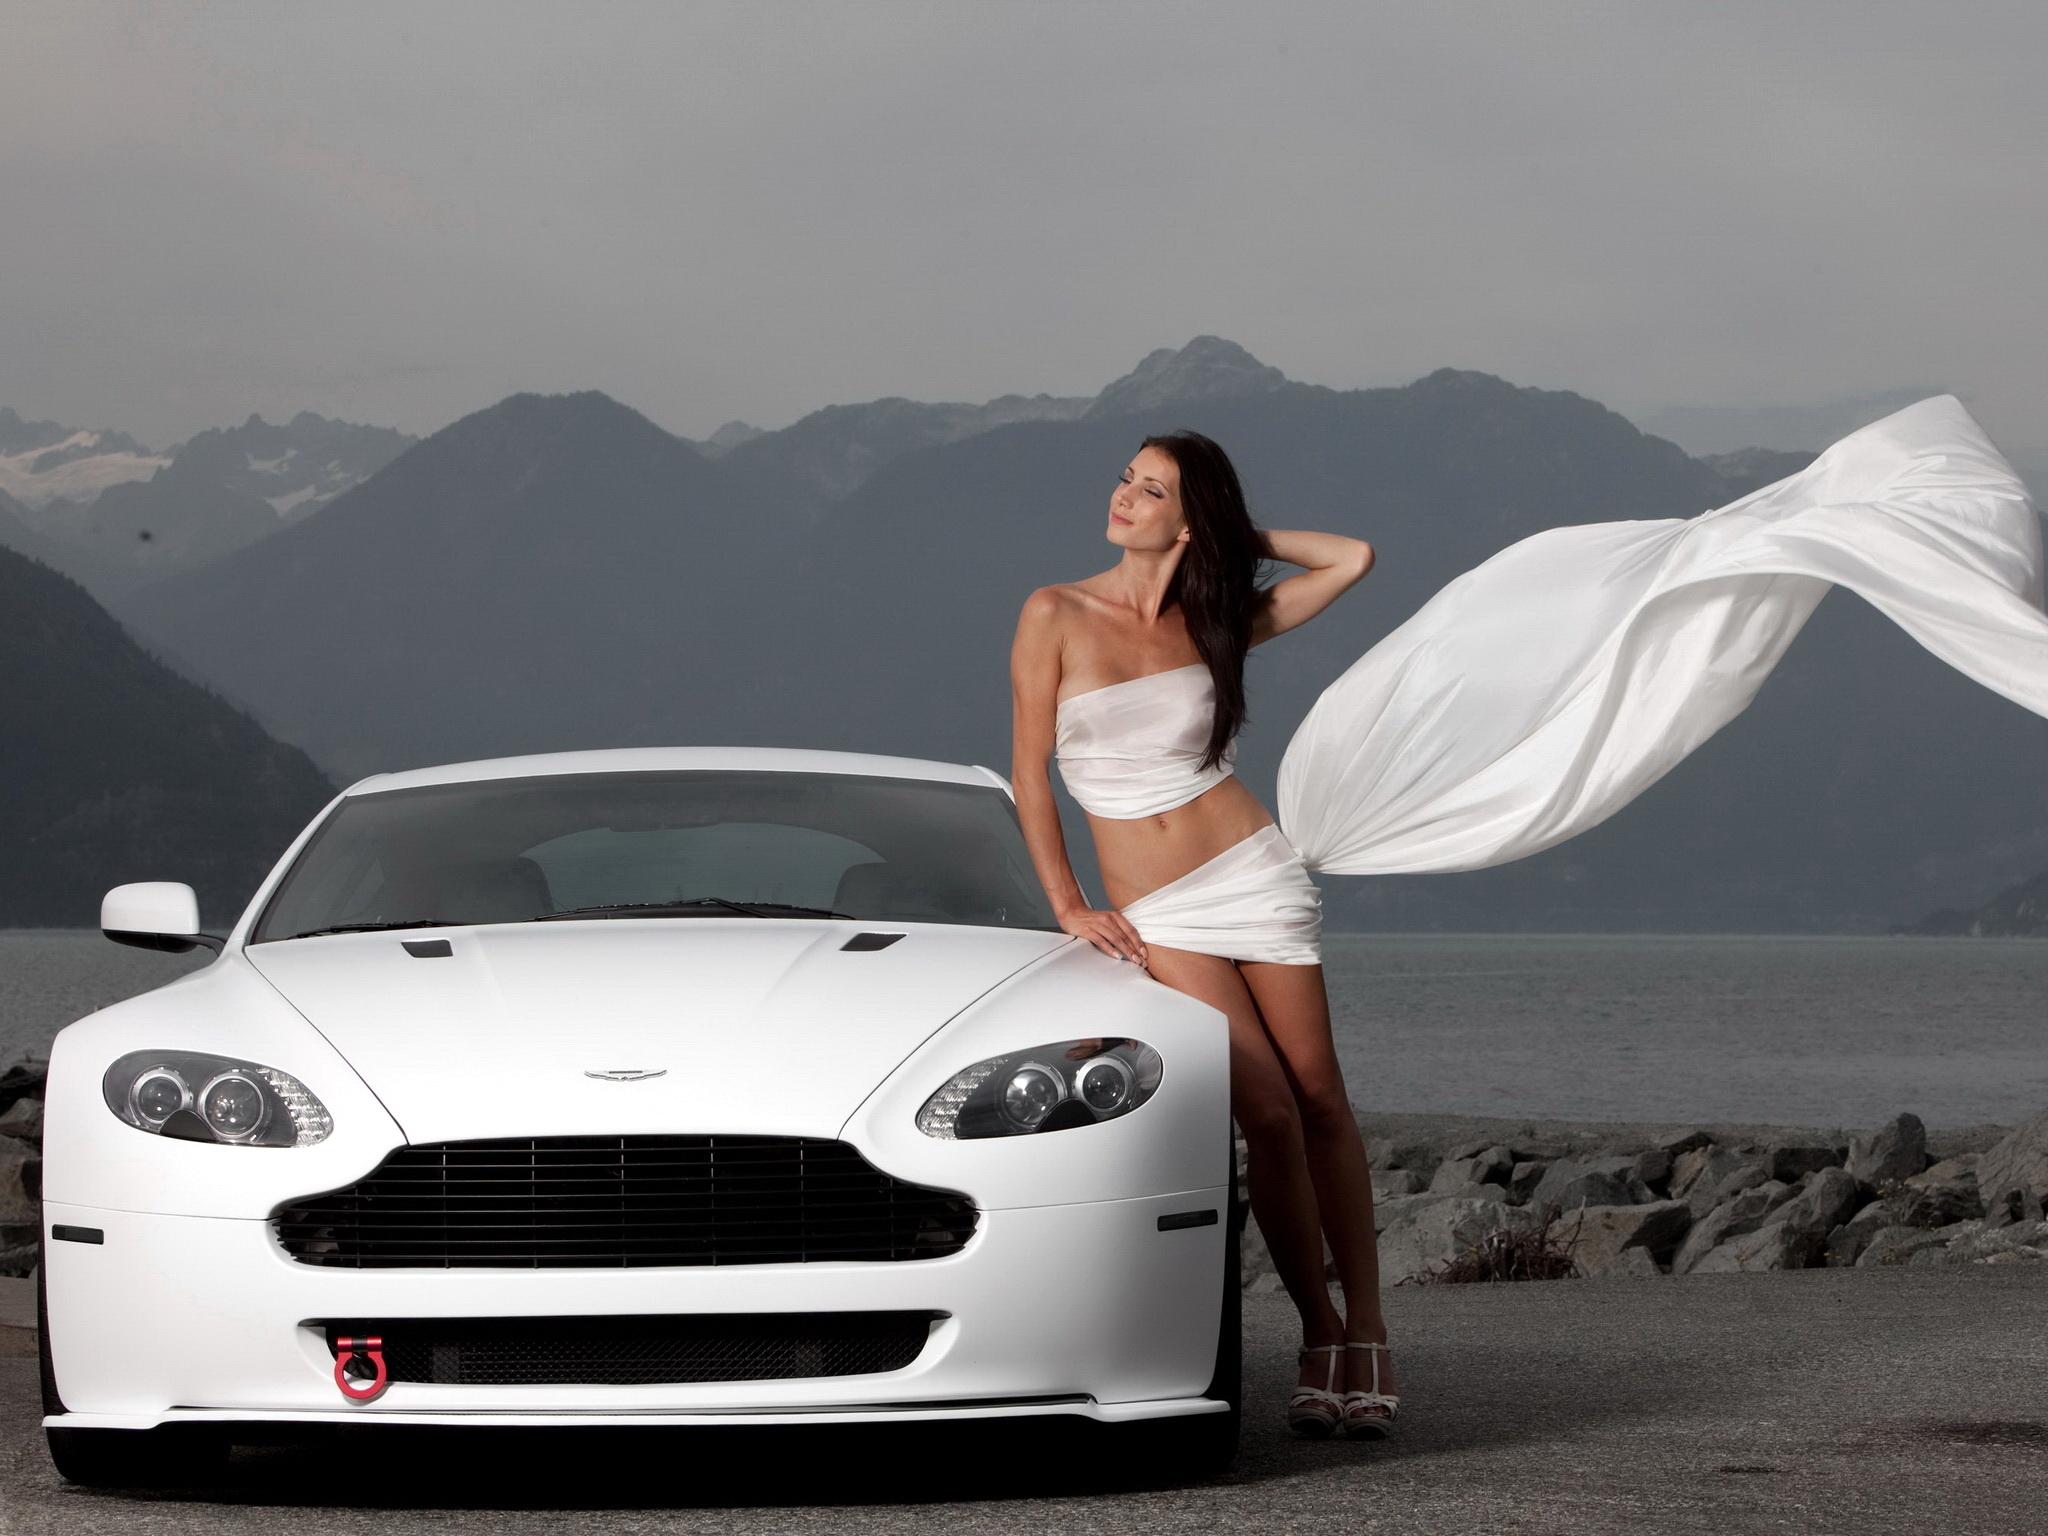 Girls with cars wallpaper Group (27+)